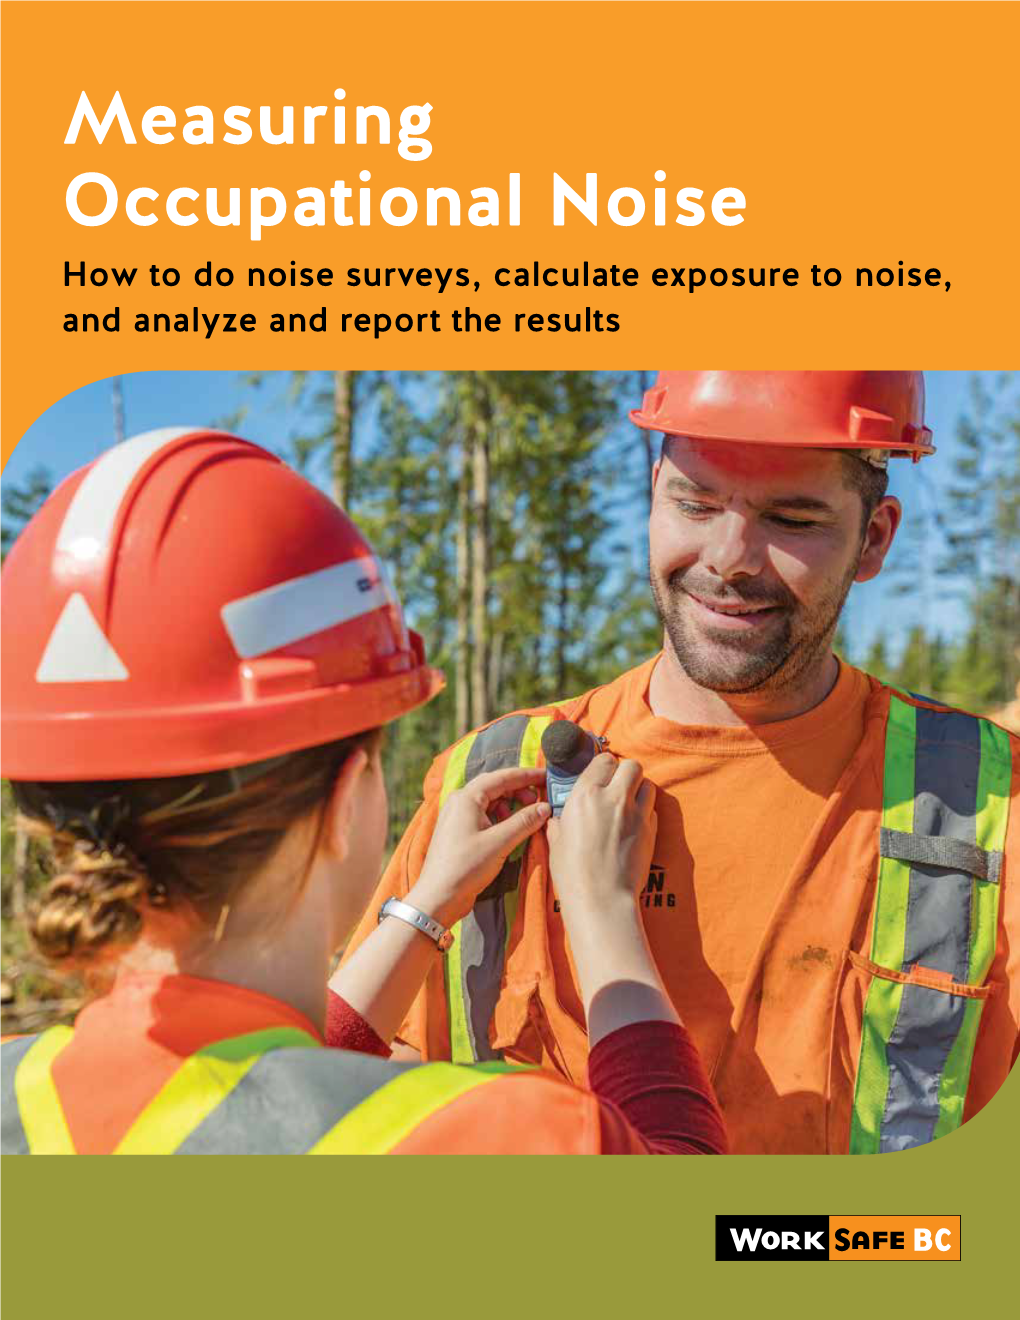 Measuring Occupational Noise How to Do Noise Surveys, Calculate Exposure to Noise, and Analyze and Report the Results About Worksafebc